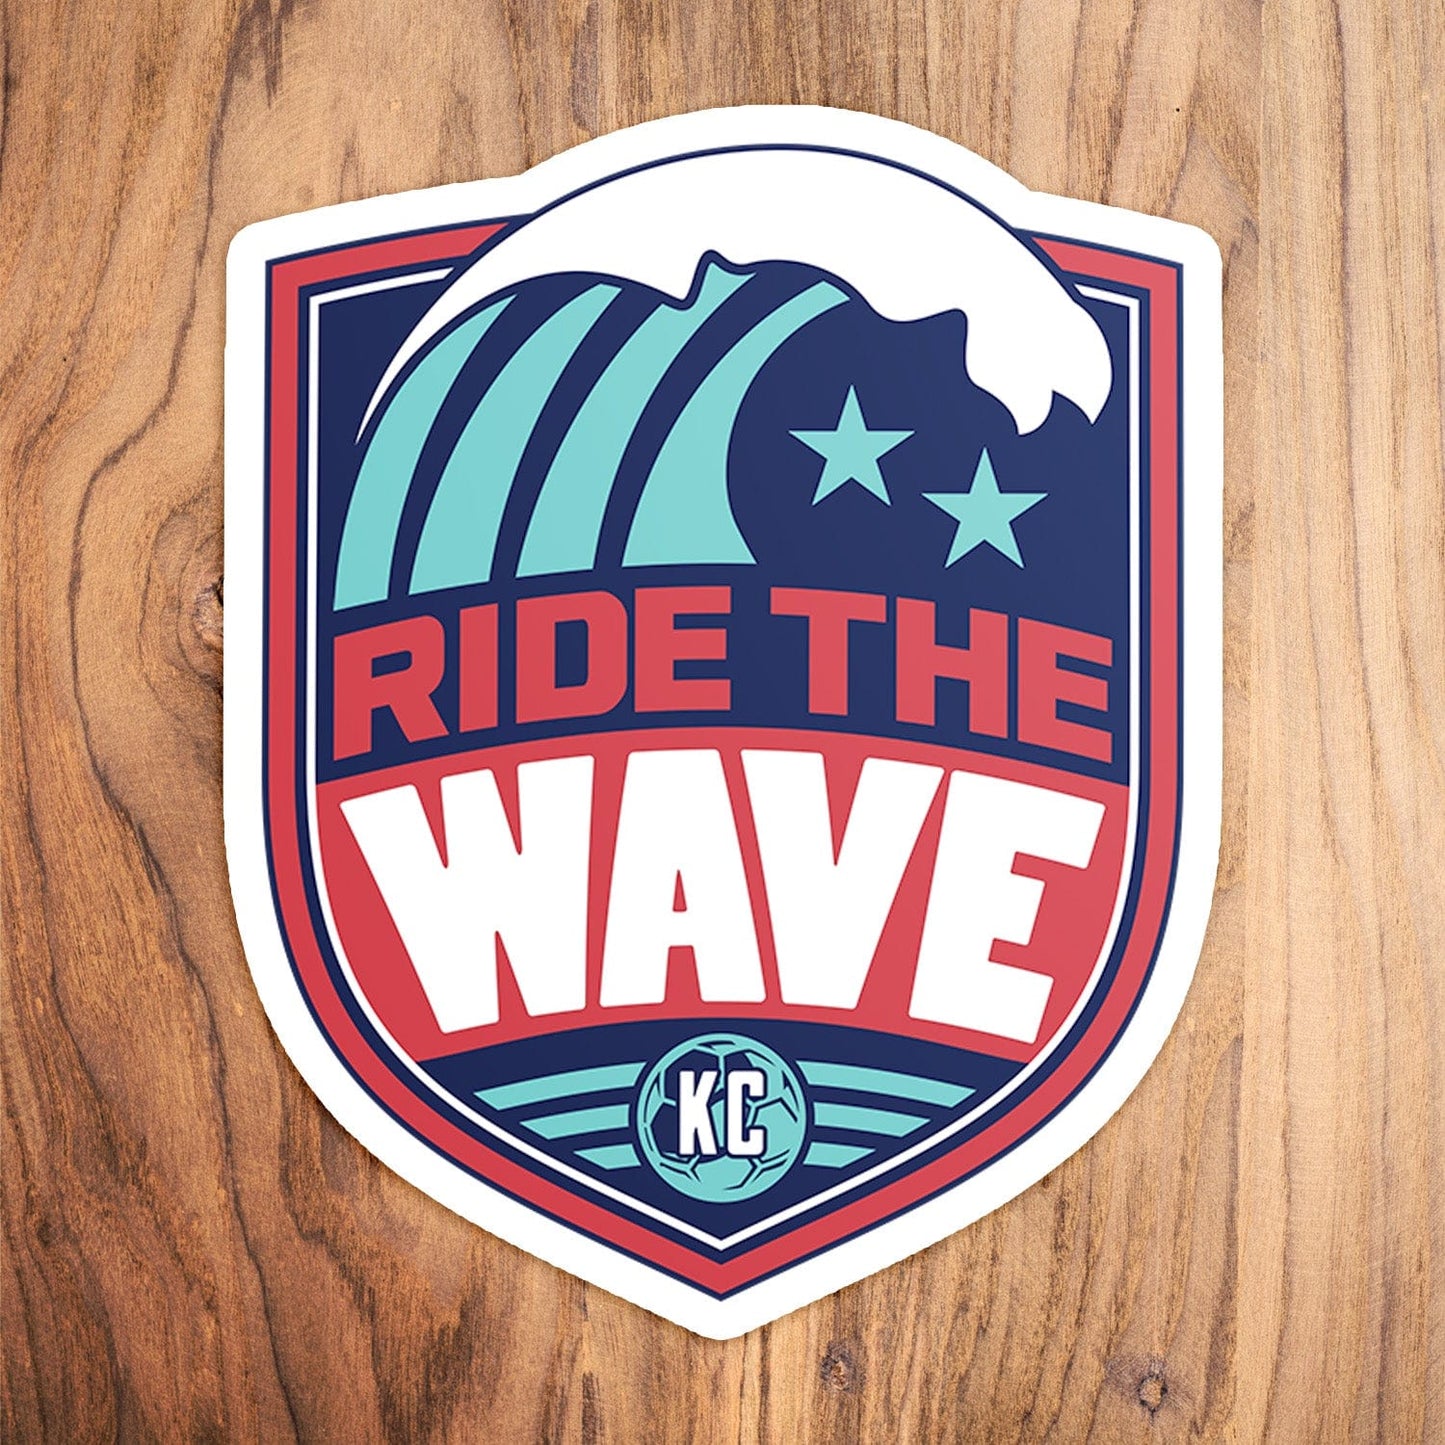 KC Swag Kansas City Current RIDE THE WAVE die-cut sticker decal made from waterproof vinyl on wood table